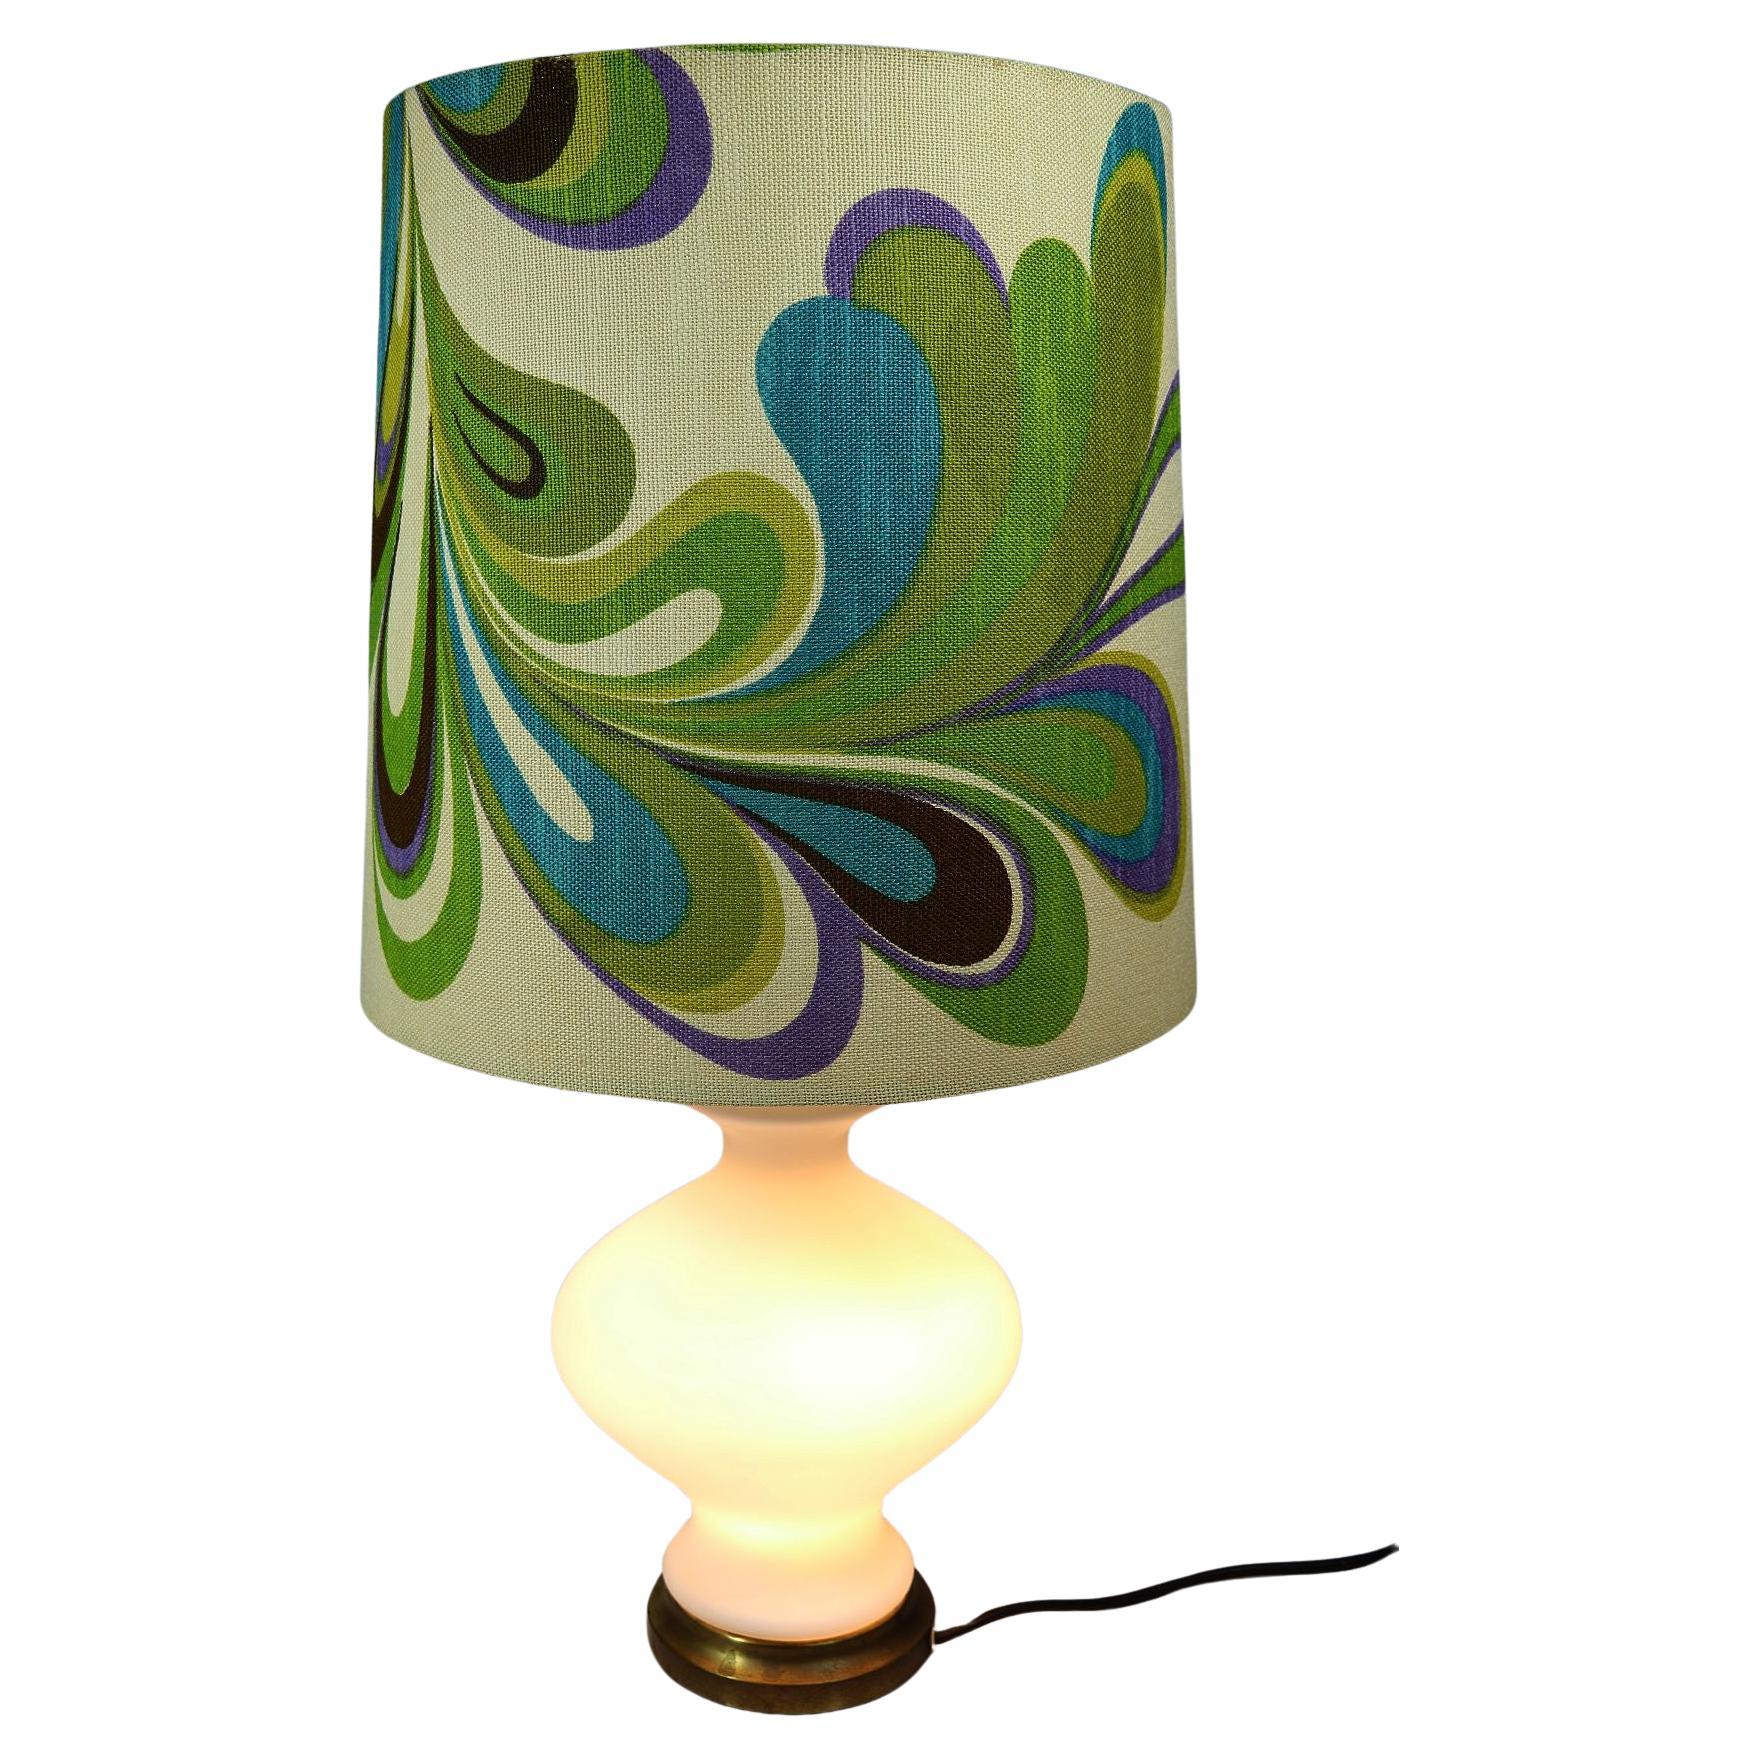 Floor lamp or large table lamp with large lampshade in Pop Art decor and linen look.
 
White glass base, illuminated.

Total height: 81 cm / 31.9 inch
Diameter lampshade: 40 cm / 15.7 inch
 
Manufacturer unknown, could be Doria.
 